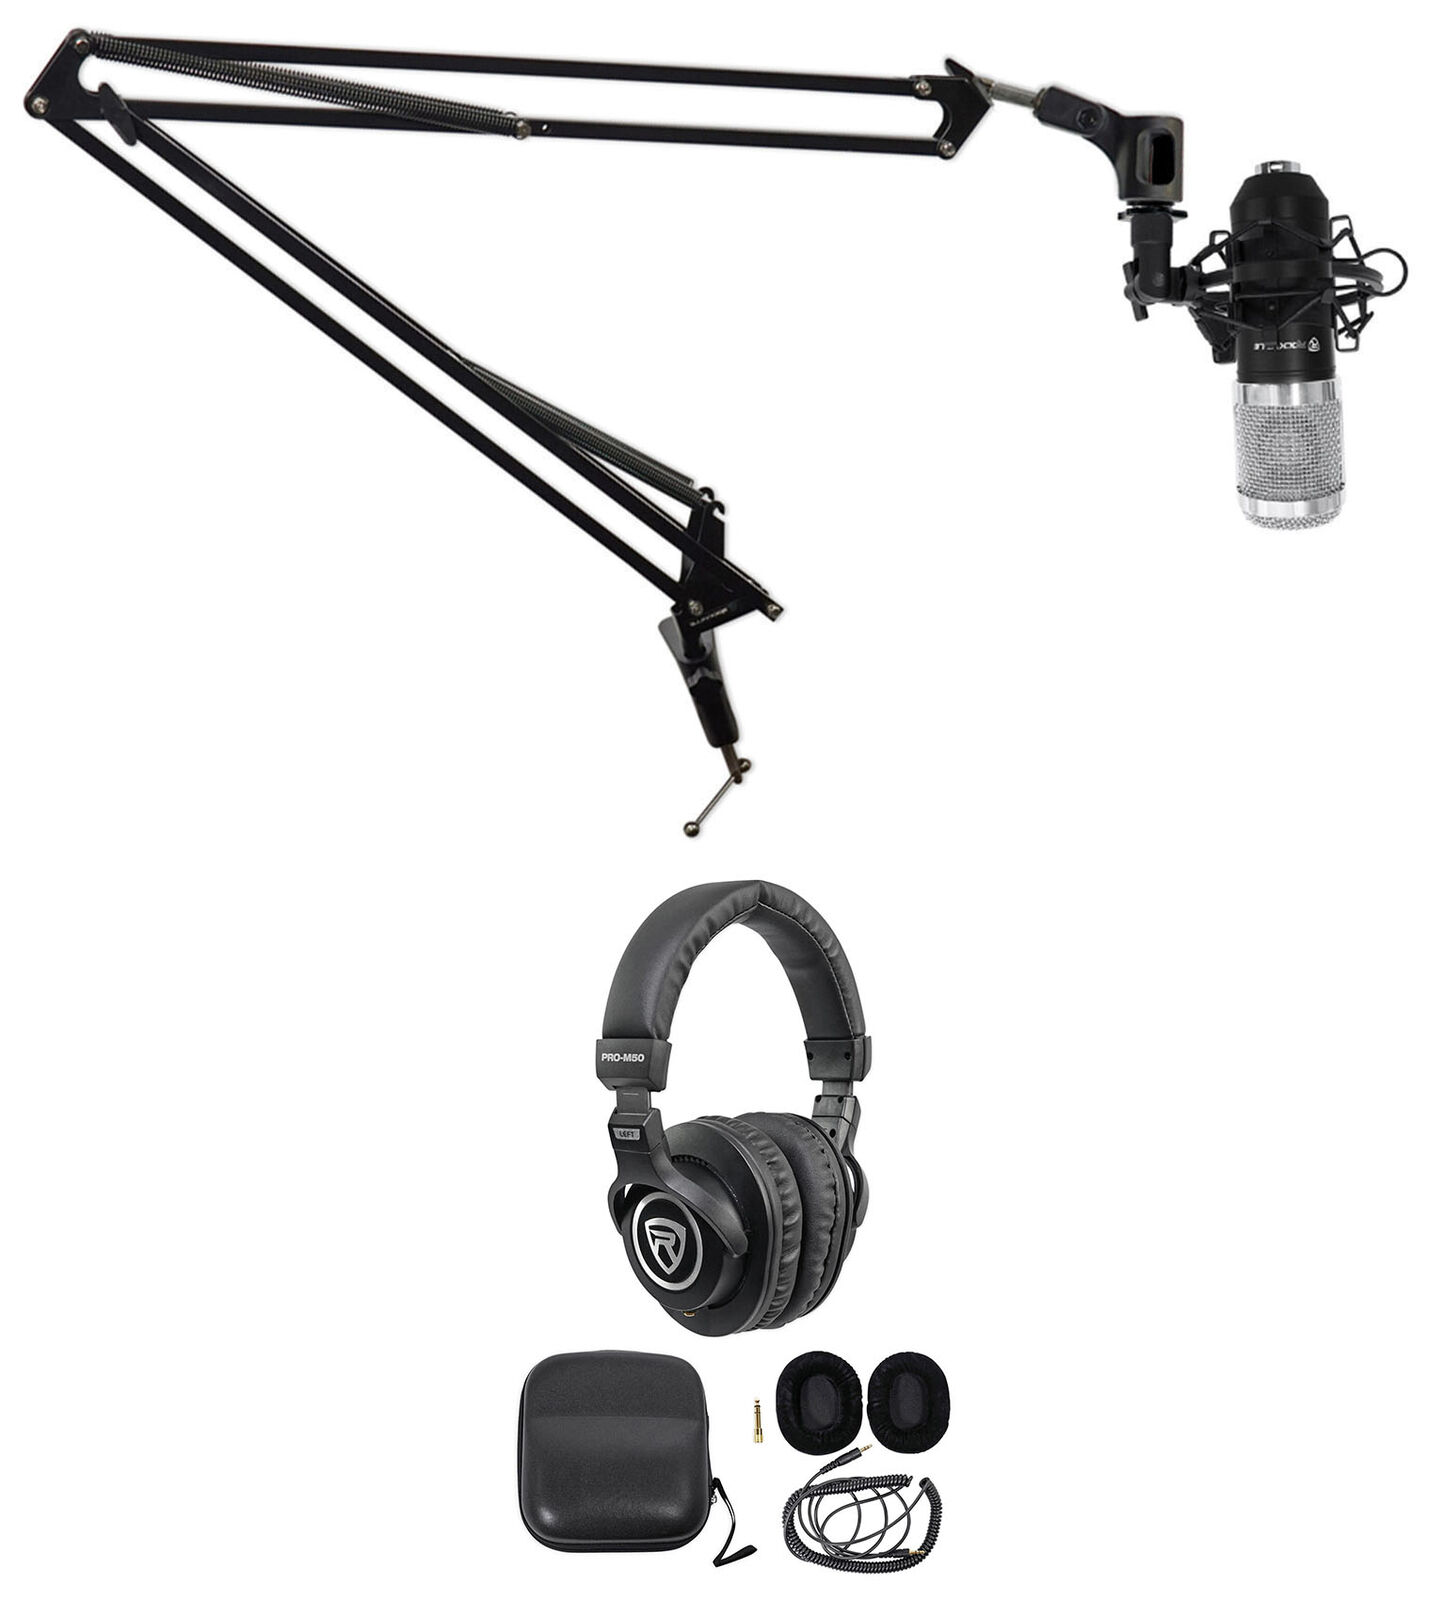 Rockville Pc Gaming Streaming Twitch Bundle Rcm01 Microphone+headphones+boom Arm